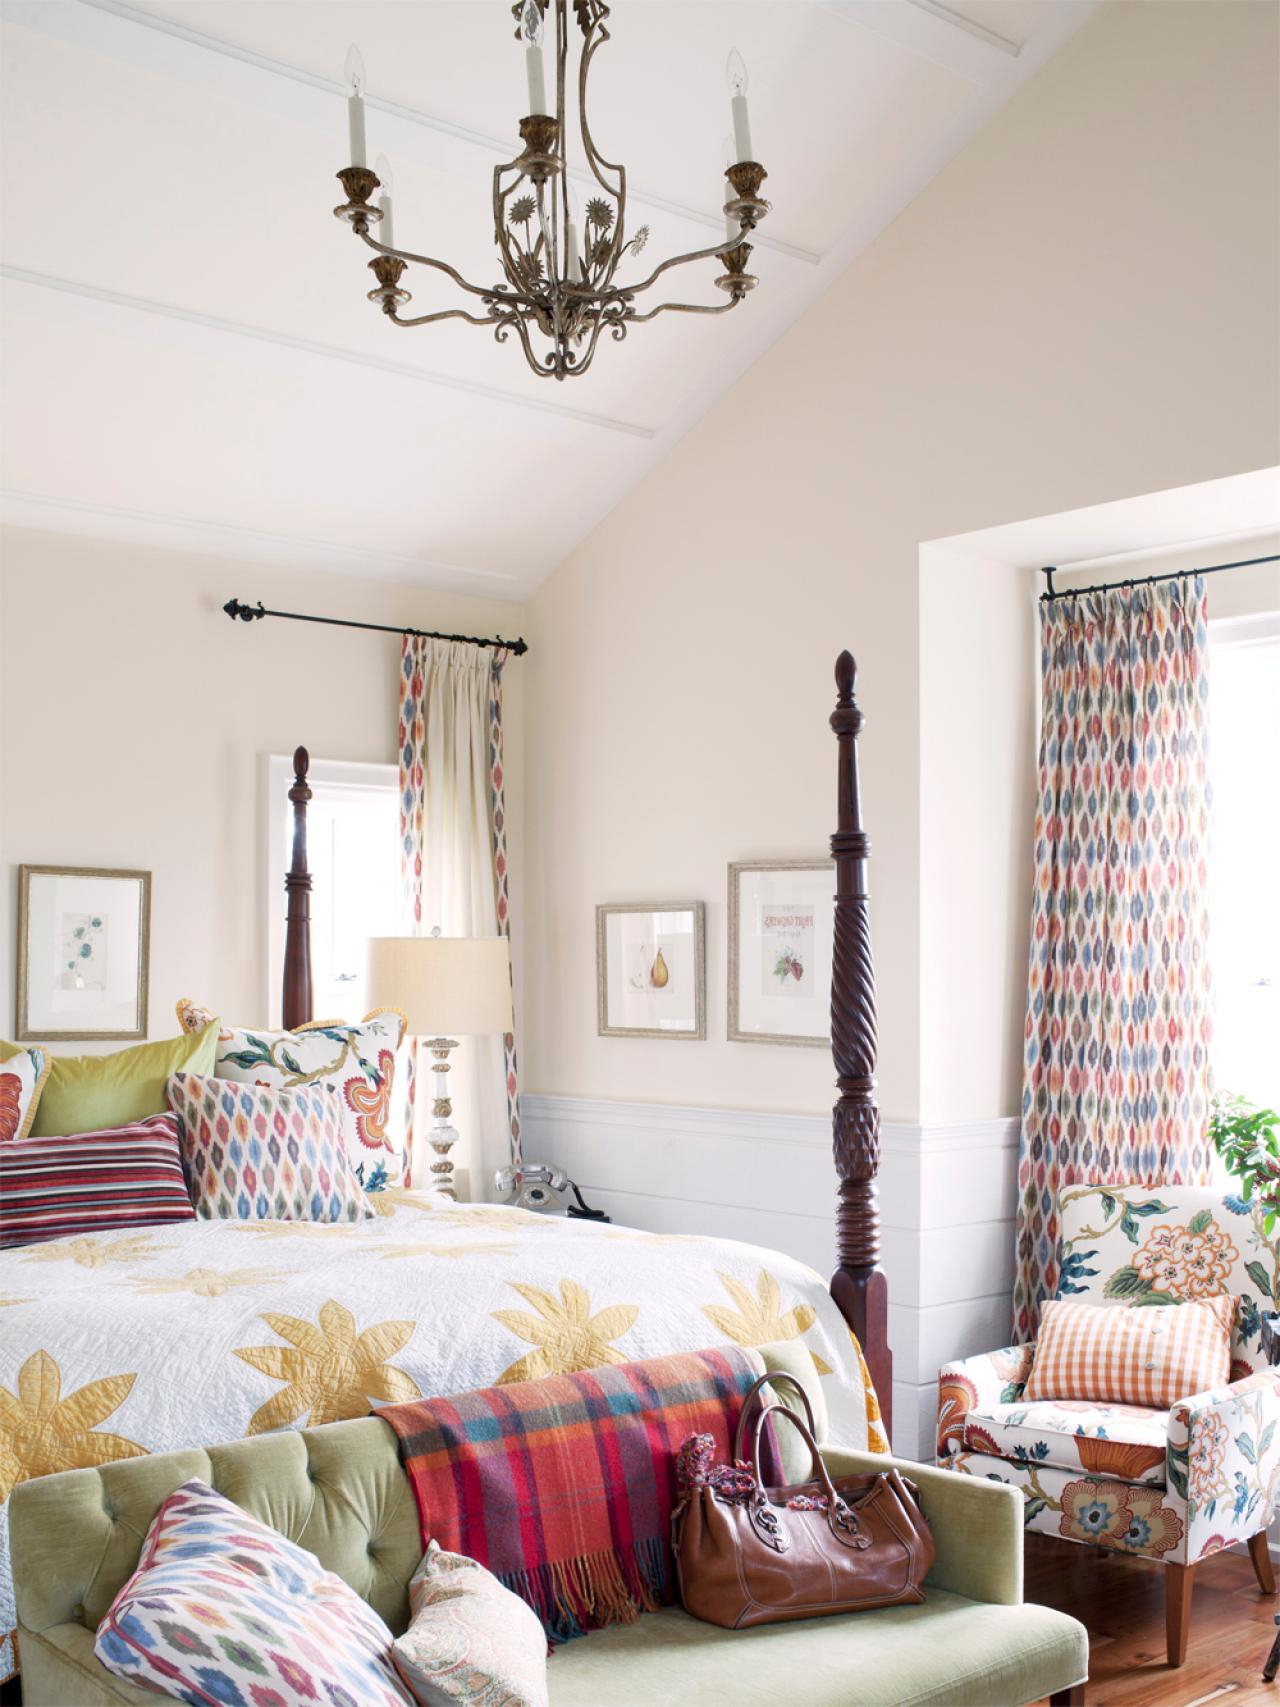 Sarah Richardson Turns A Farmhouse Into A Retreat Interior Design Styles And Color Schemes For